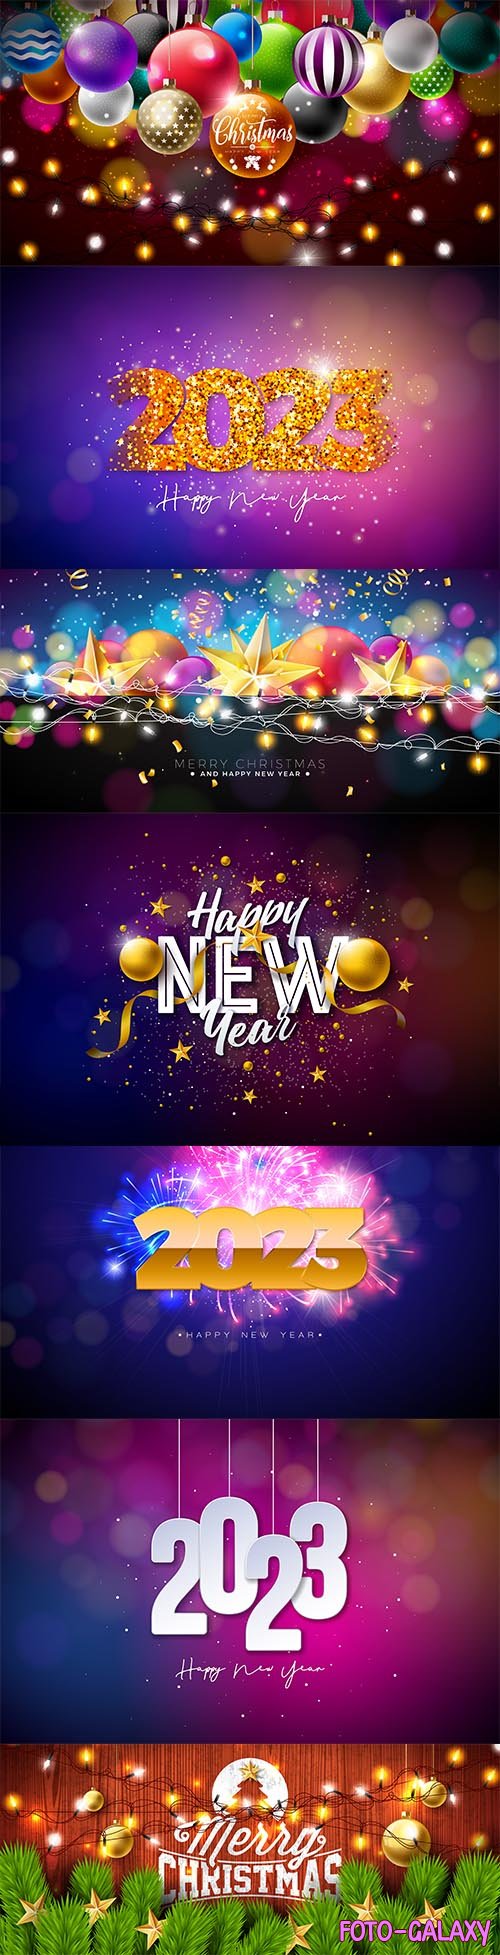 Merry christmas and happy new year illustration with gold star glass ball and lights garland